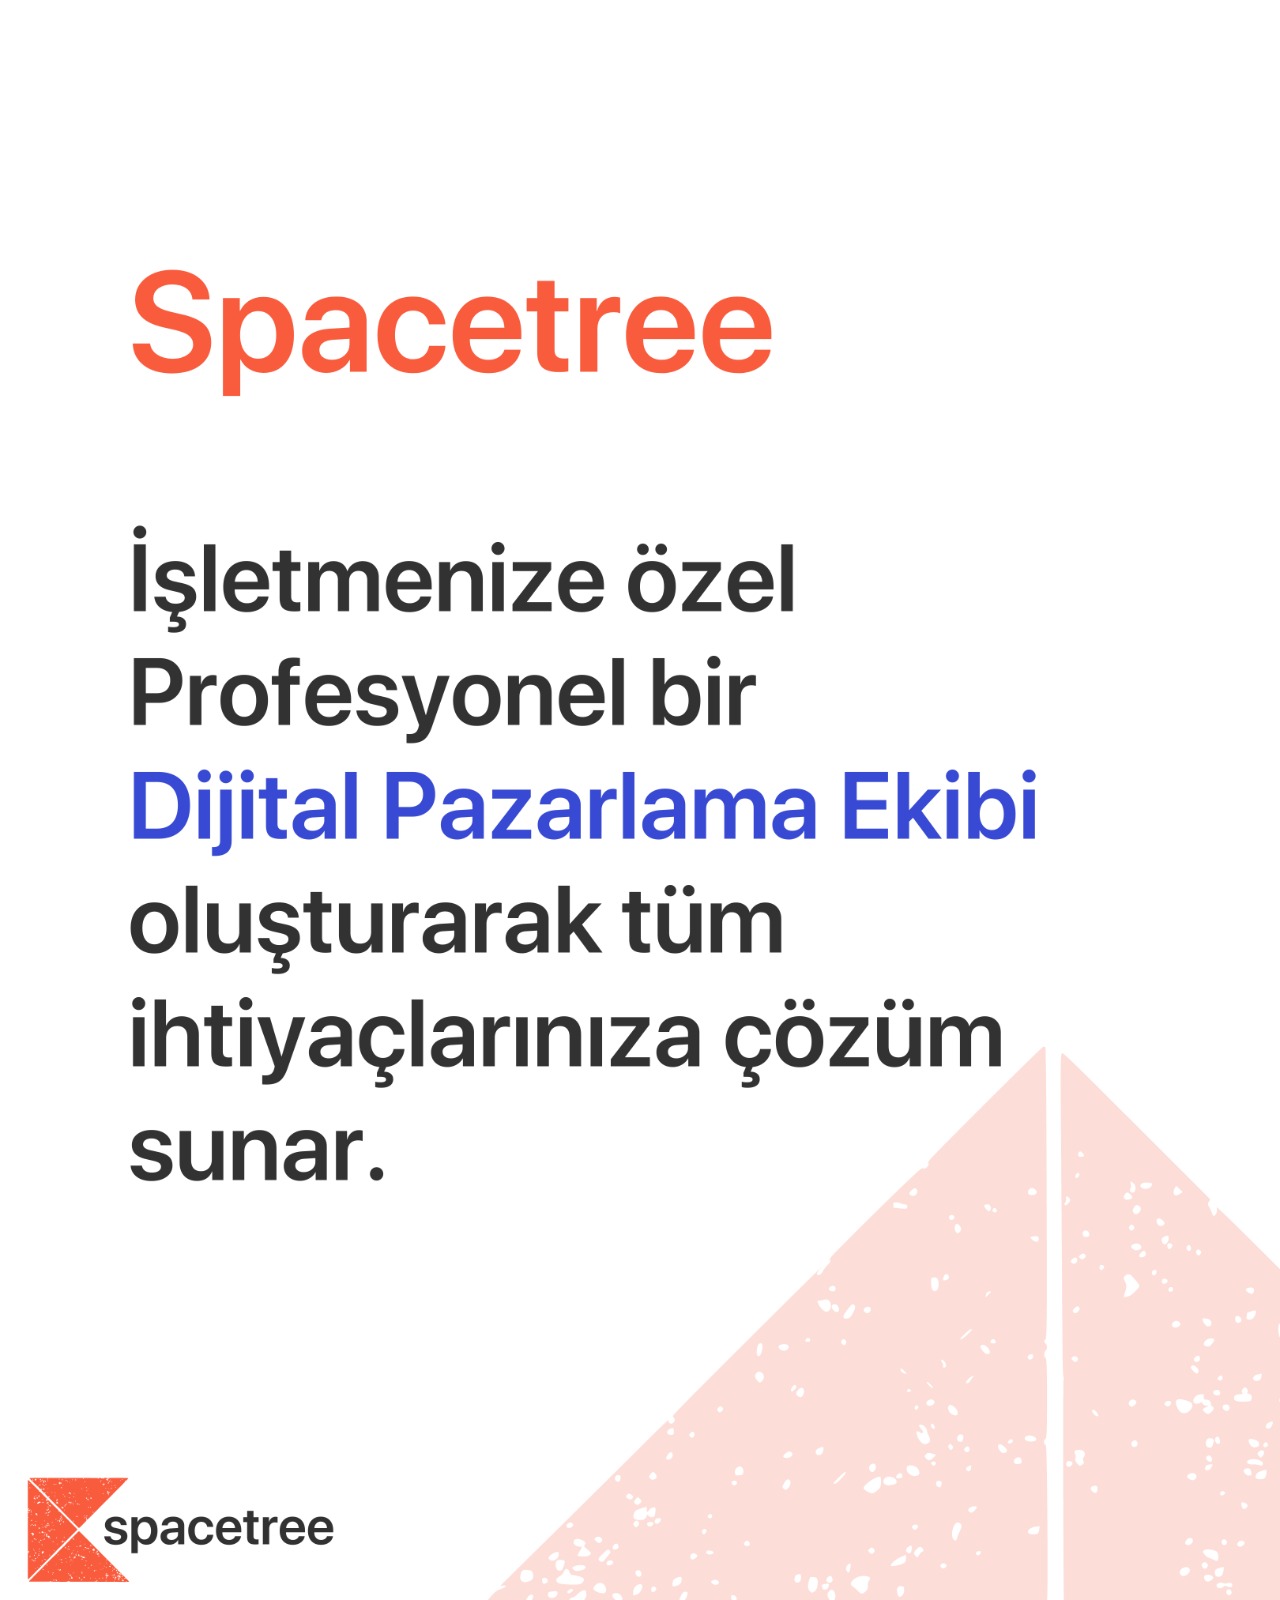 Thespacetree